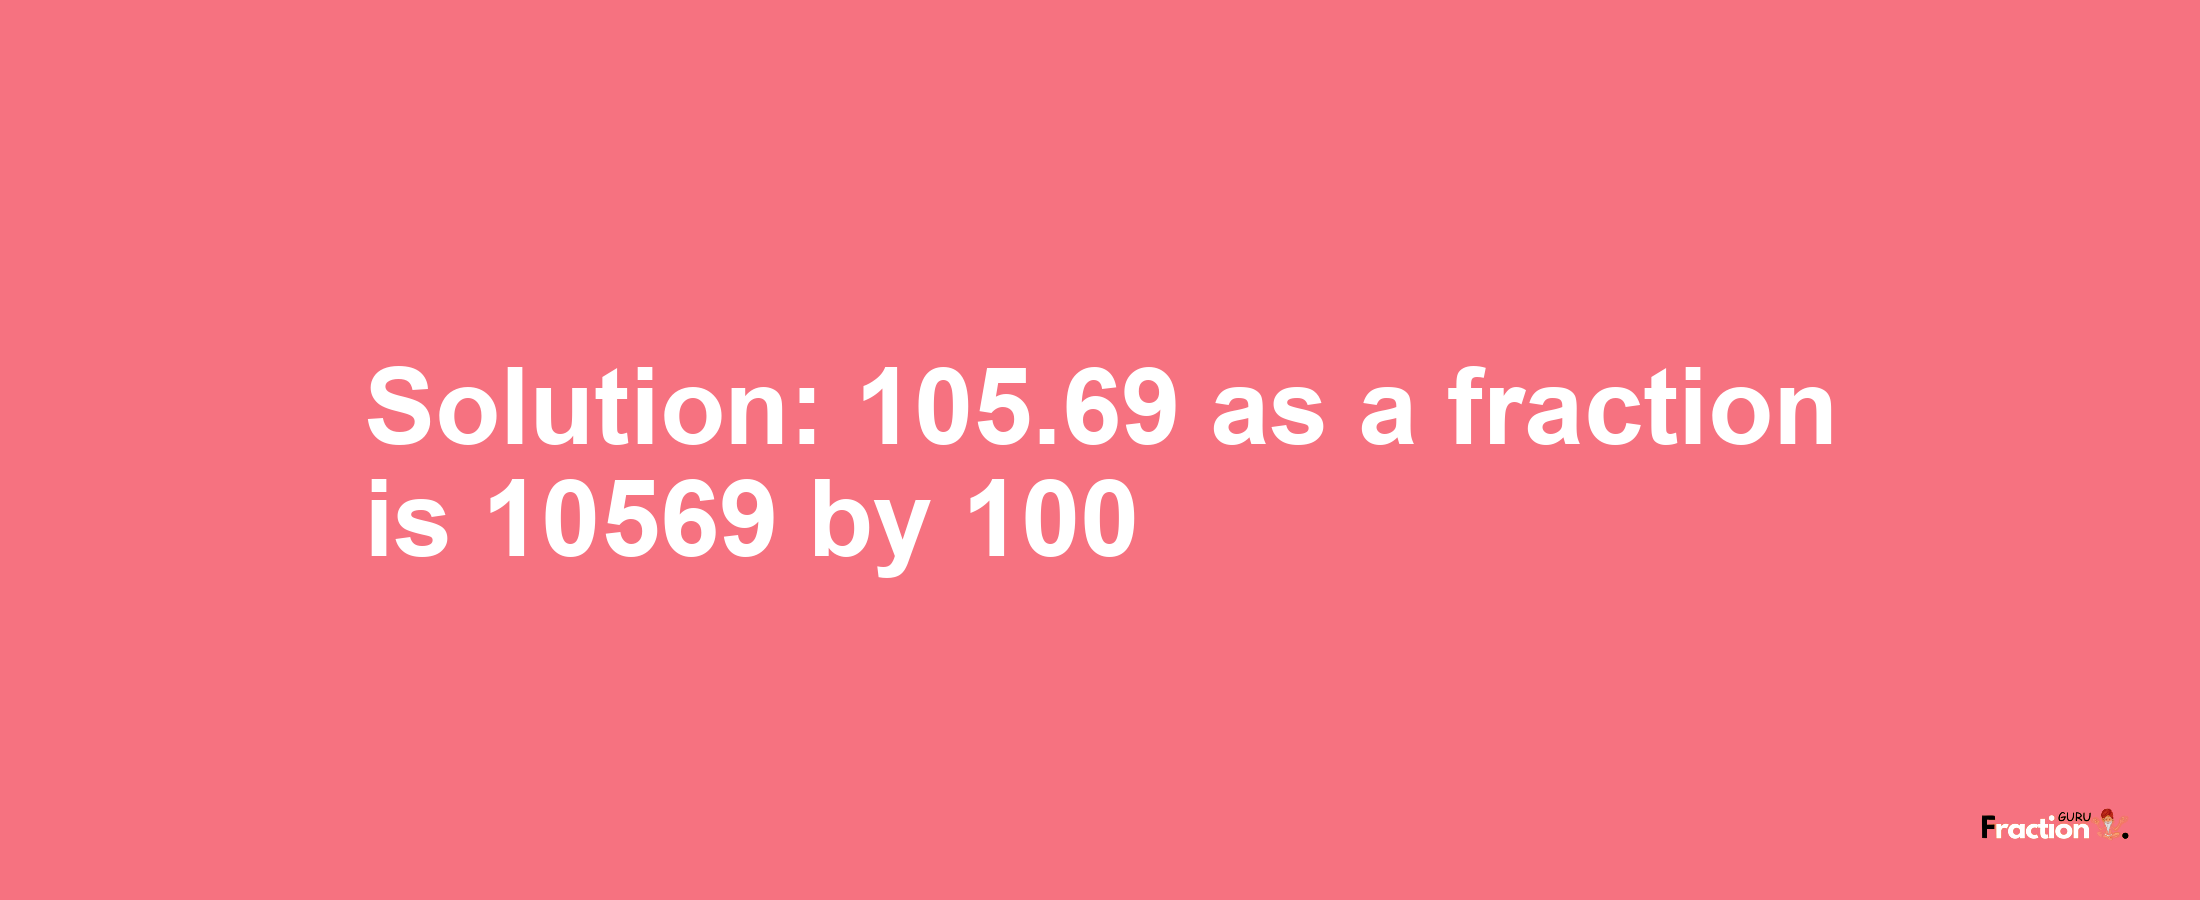 Solution:105.69 as a fraction is 10569/100